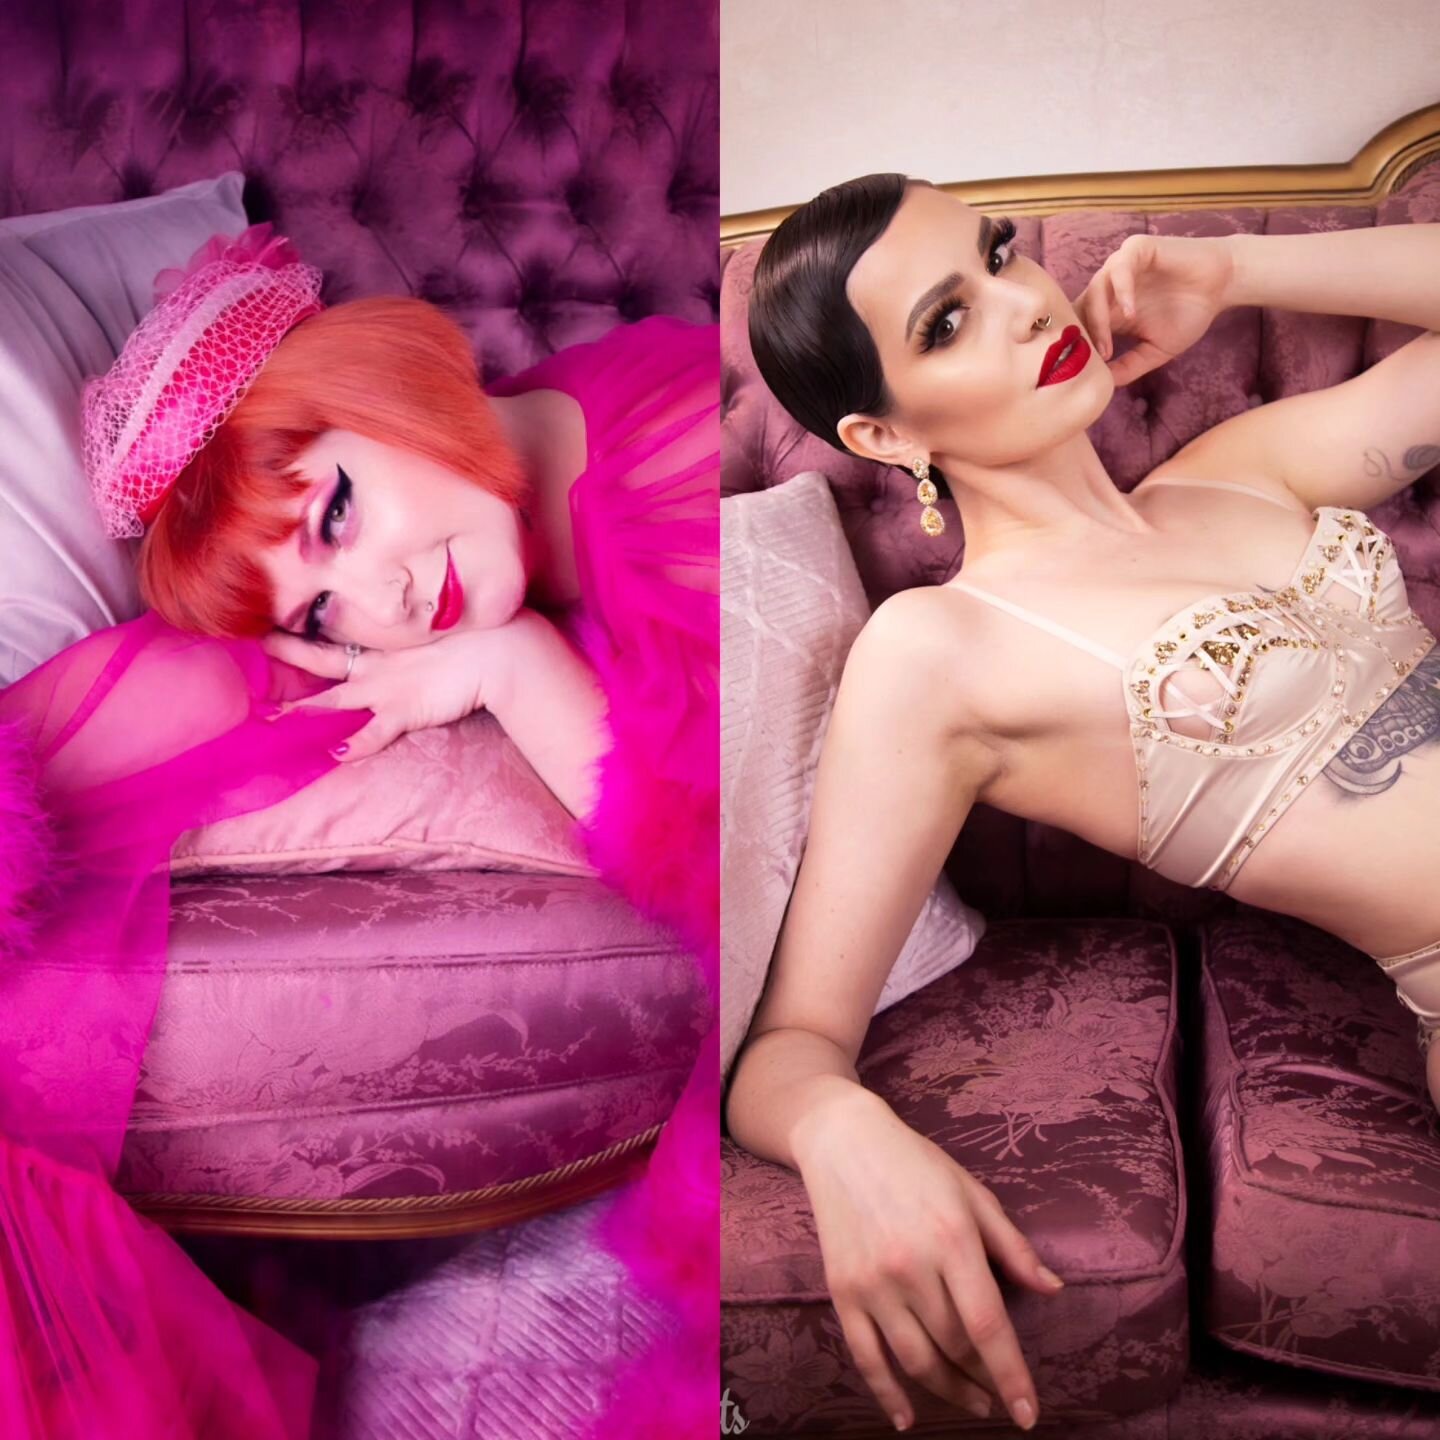 Babes! The time had come for the big reveal! 😍😍😍

On Saturday, May 20th, I have the great pleasure of teaming up with the exquisite @ava.lure for a day of burlesque workshops and coaching! 🎉🎉🎉

I'll be bringing my bump and grind magic to the da